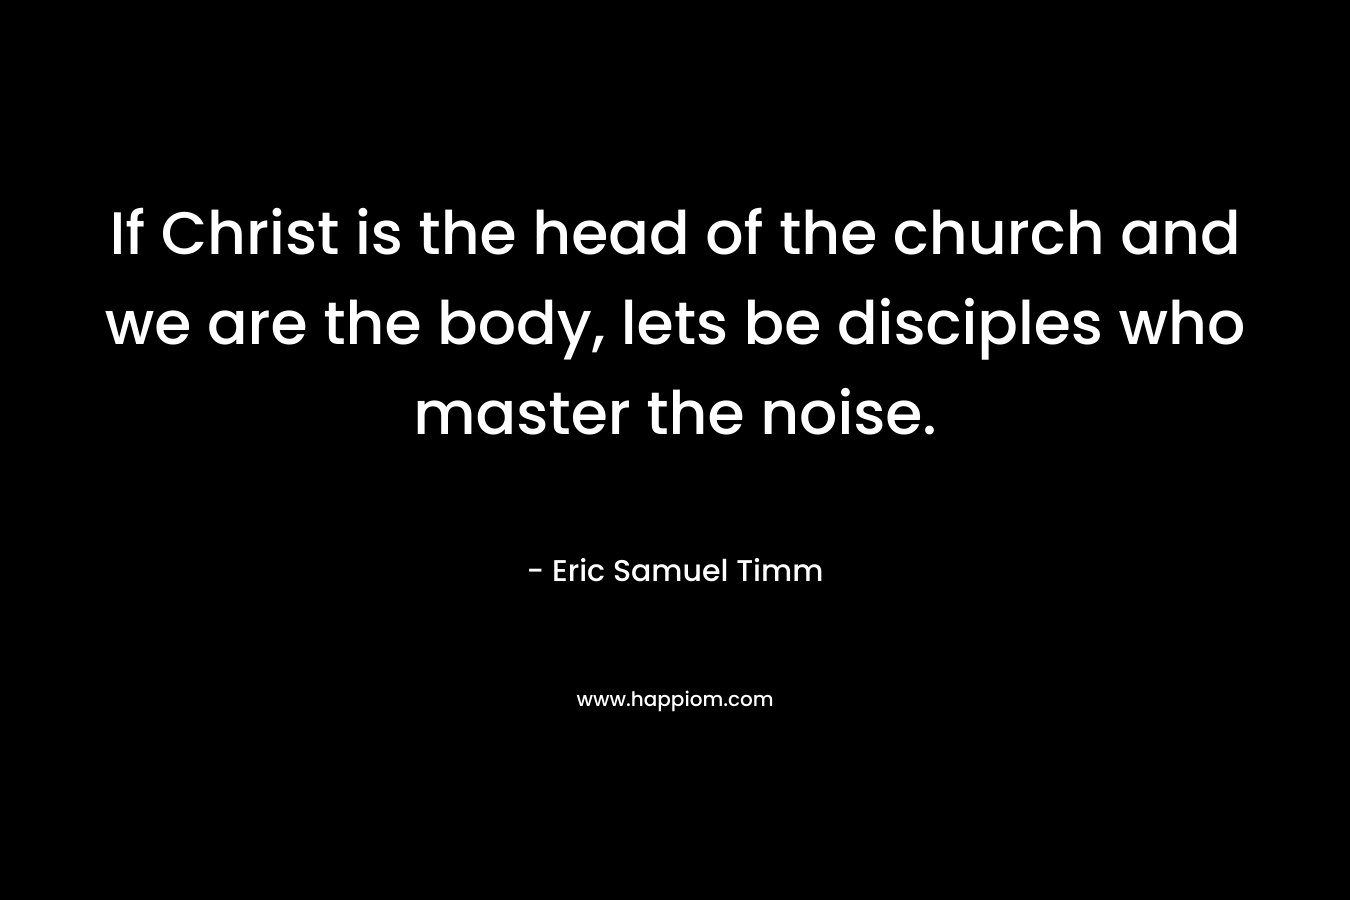 If Christ is the head of the church and we are the body, lets be disciples who master the noise.